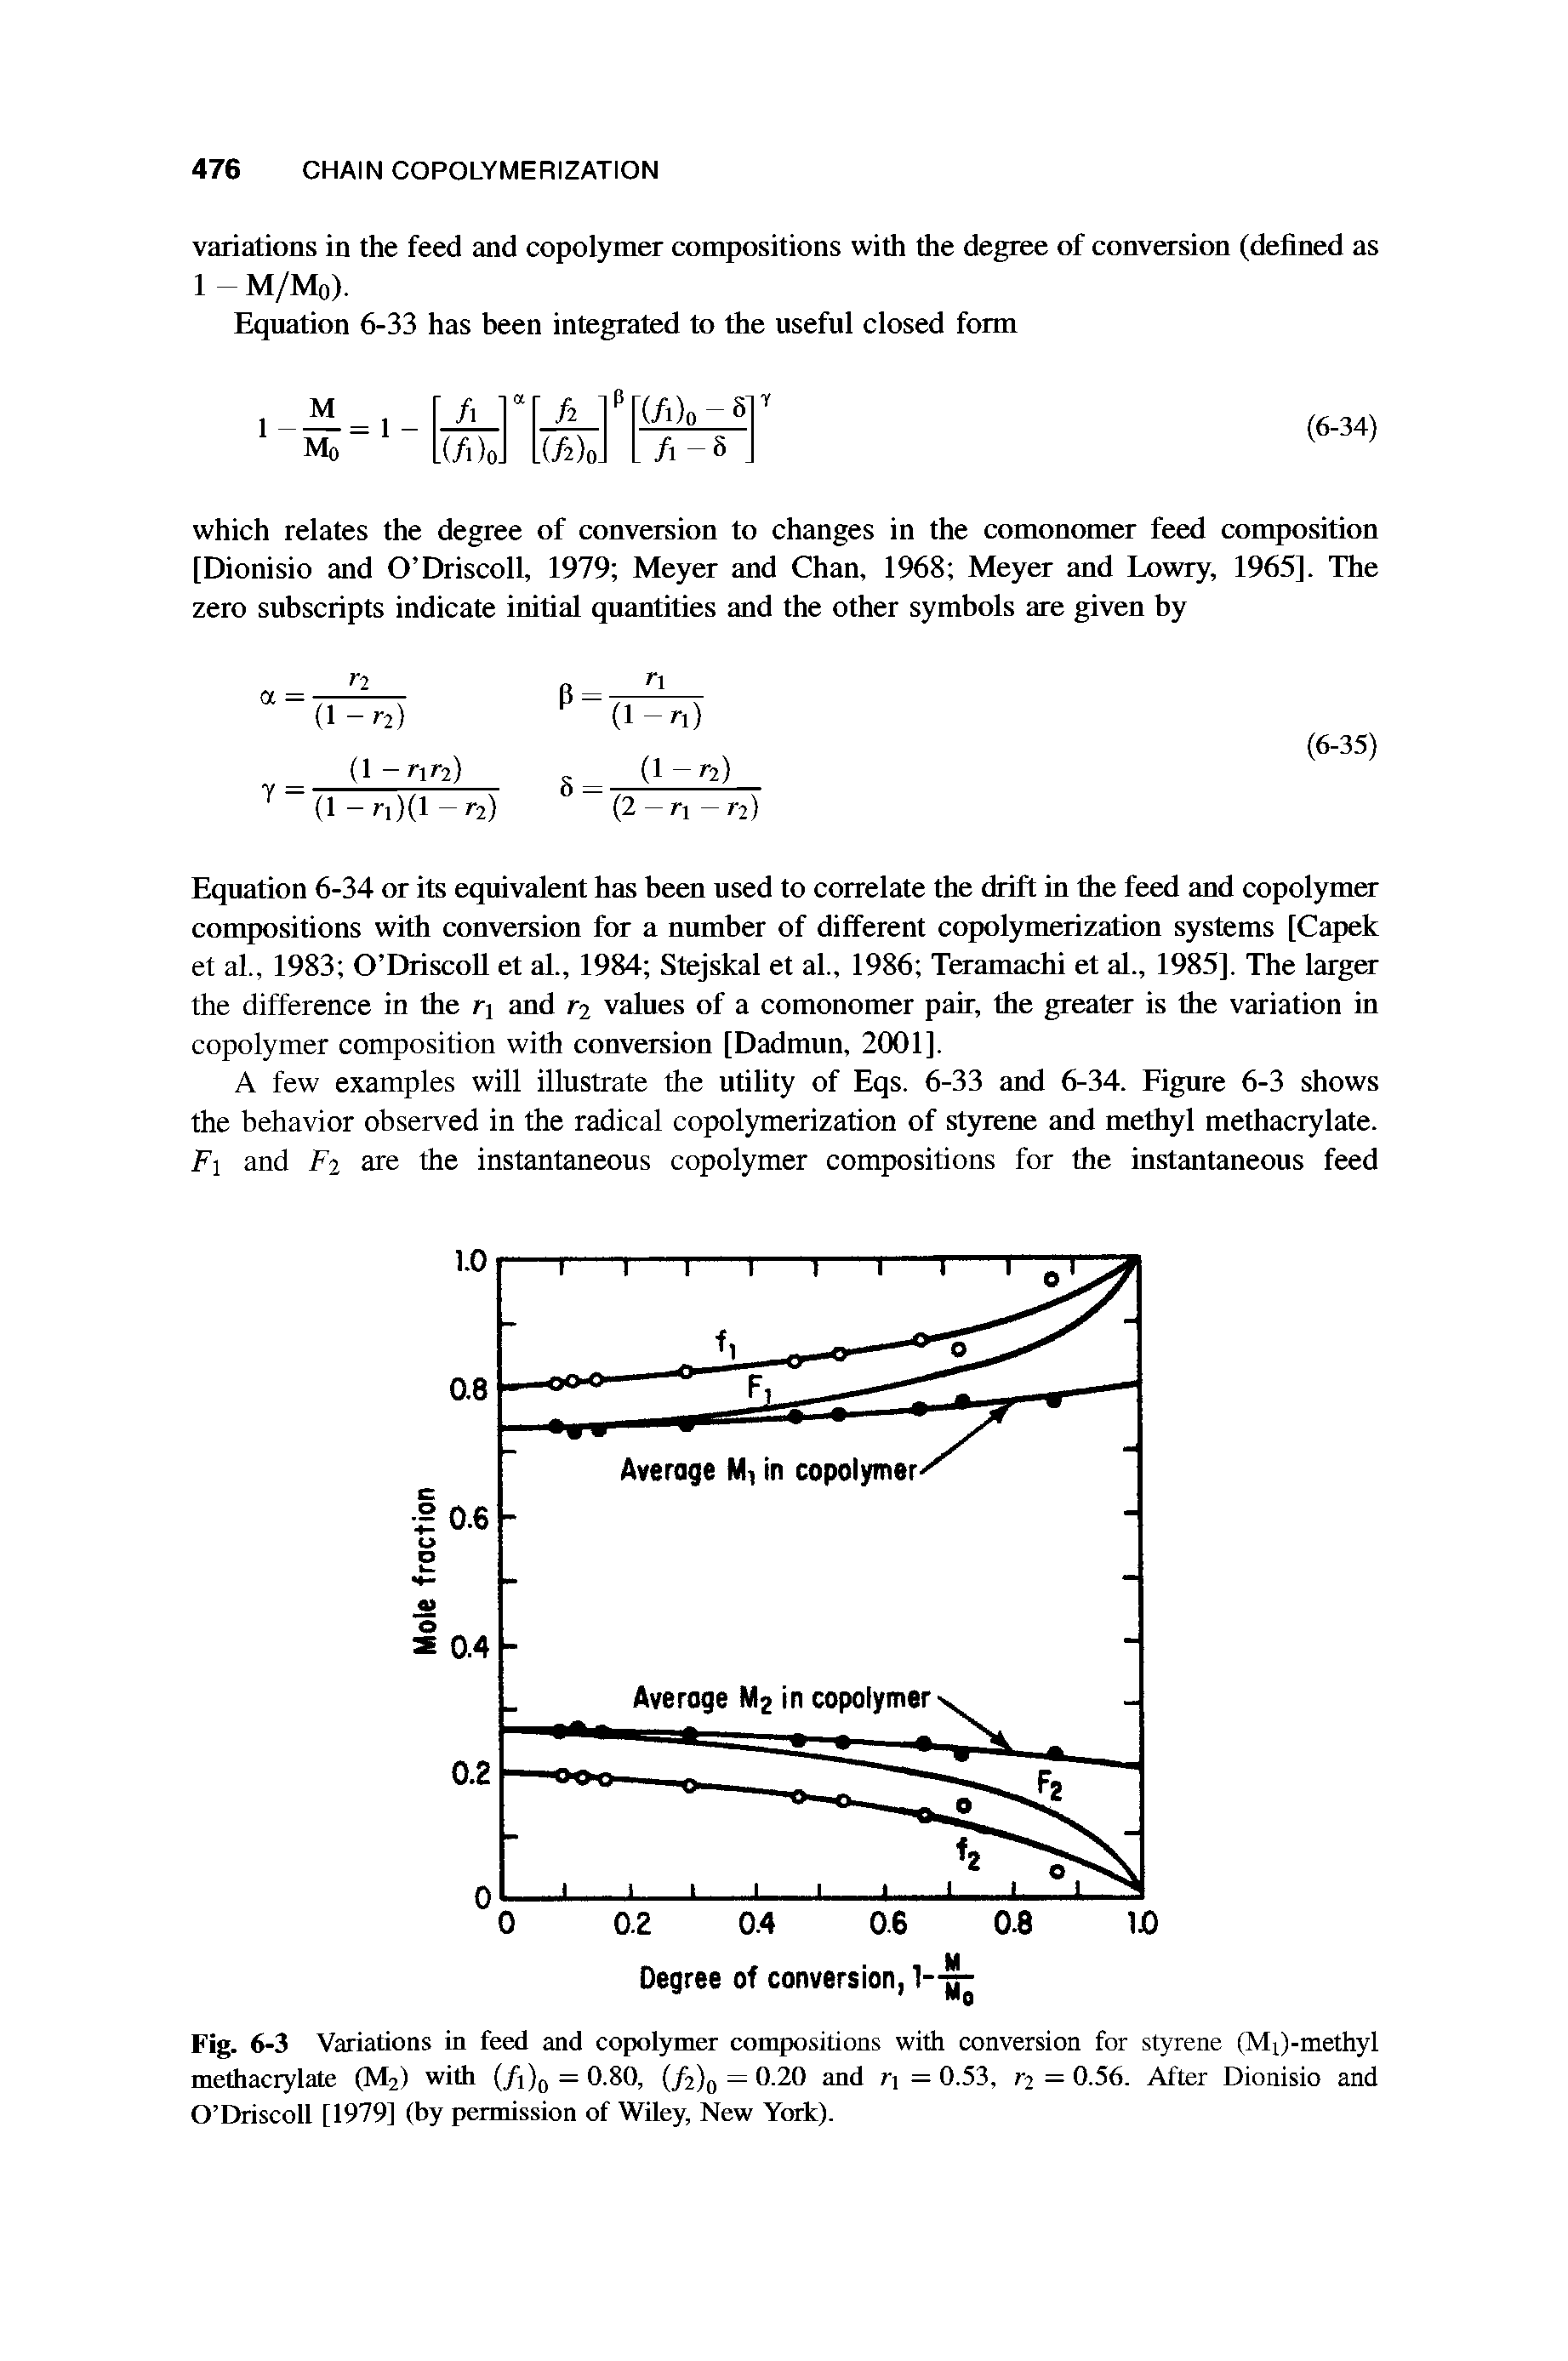 Fig. 6-3 Variations in feed and copolymer compositions with conversion for styrene (MJ-methyl methacrylate (M2) with (/i)0 = 0.80, (/2)0 = 0.20 and r = 0.53, r2 = 0.56. After Dionisio and O Driscoll [1979] (by permission of Wiley, New York).